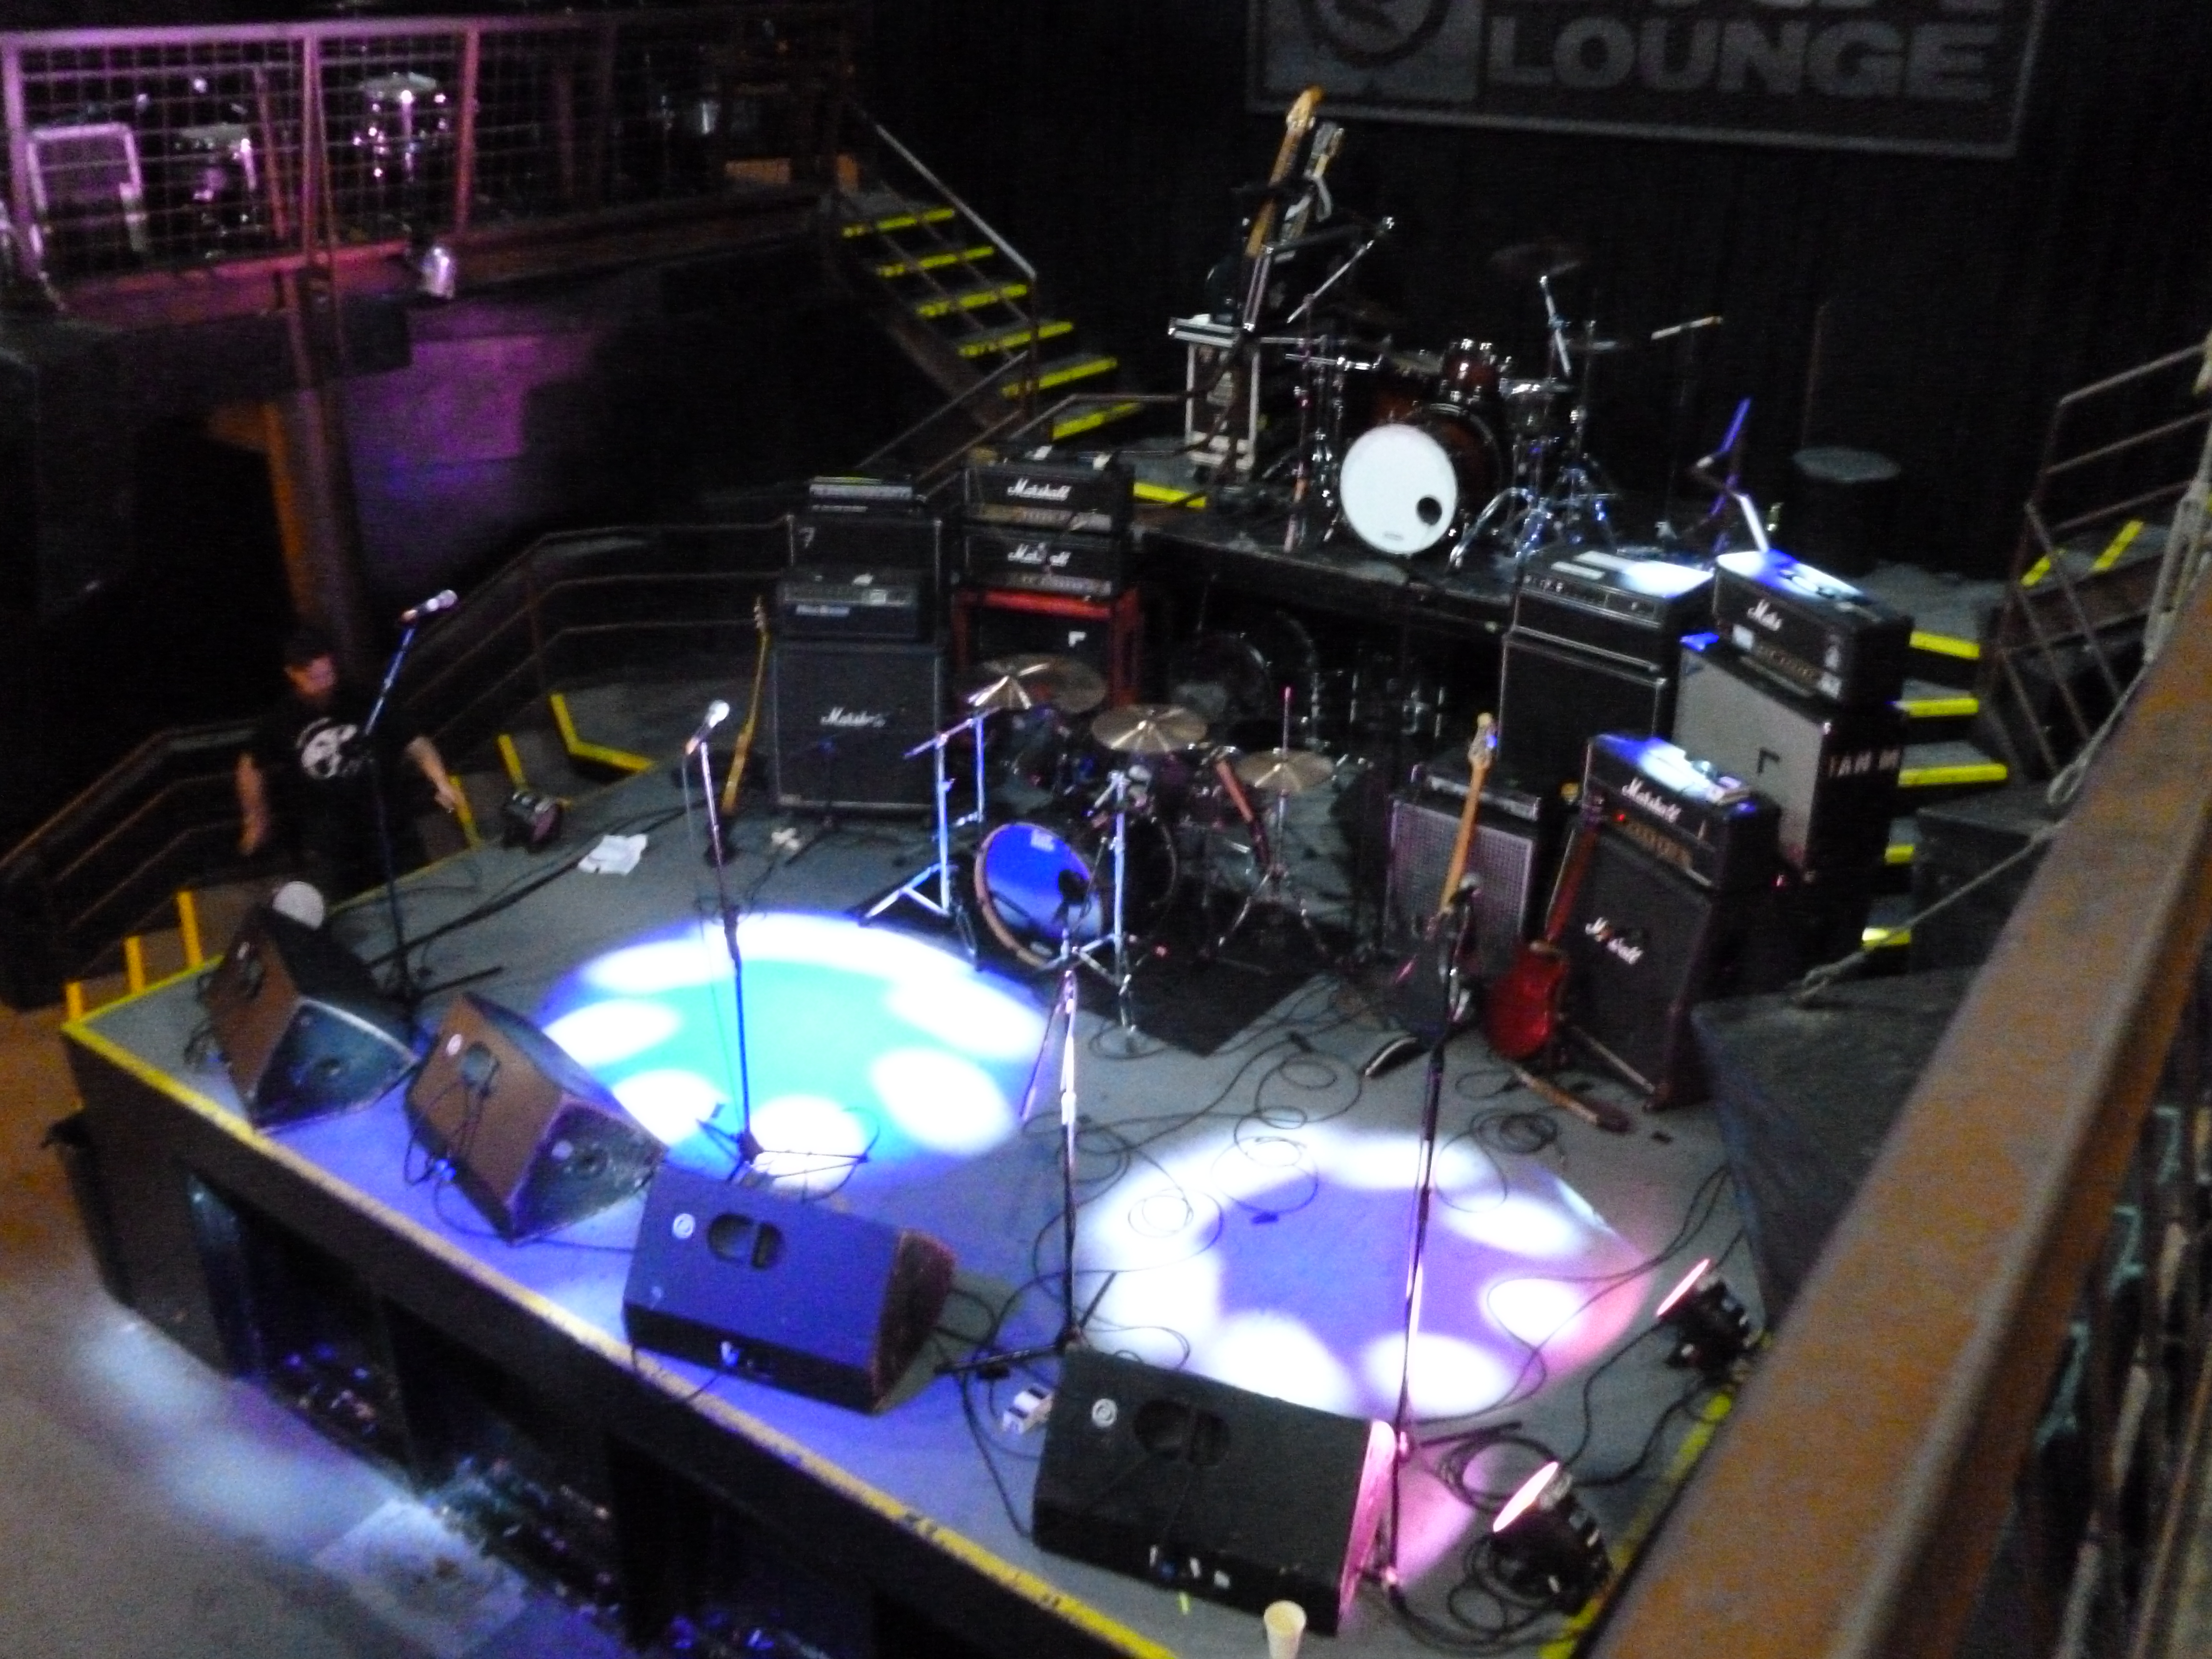 San Francisco Stage with massive drum riser